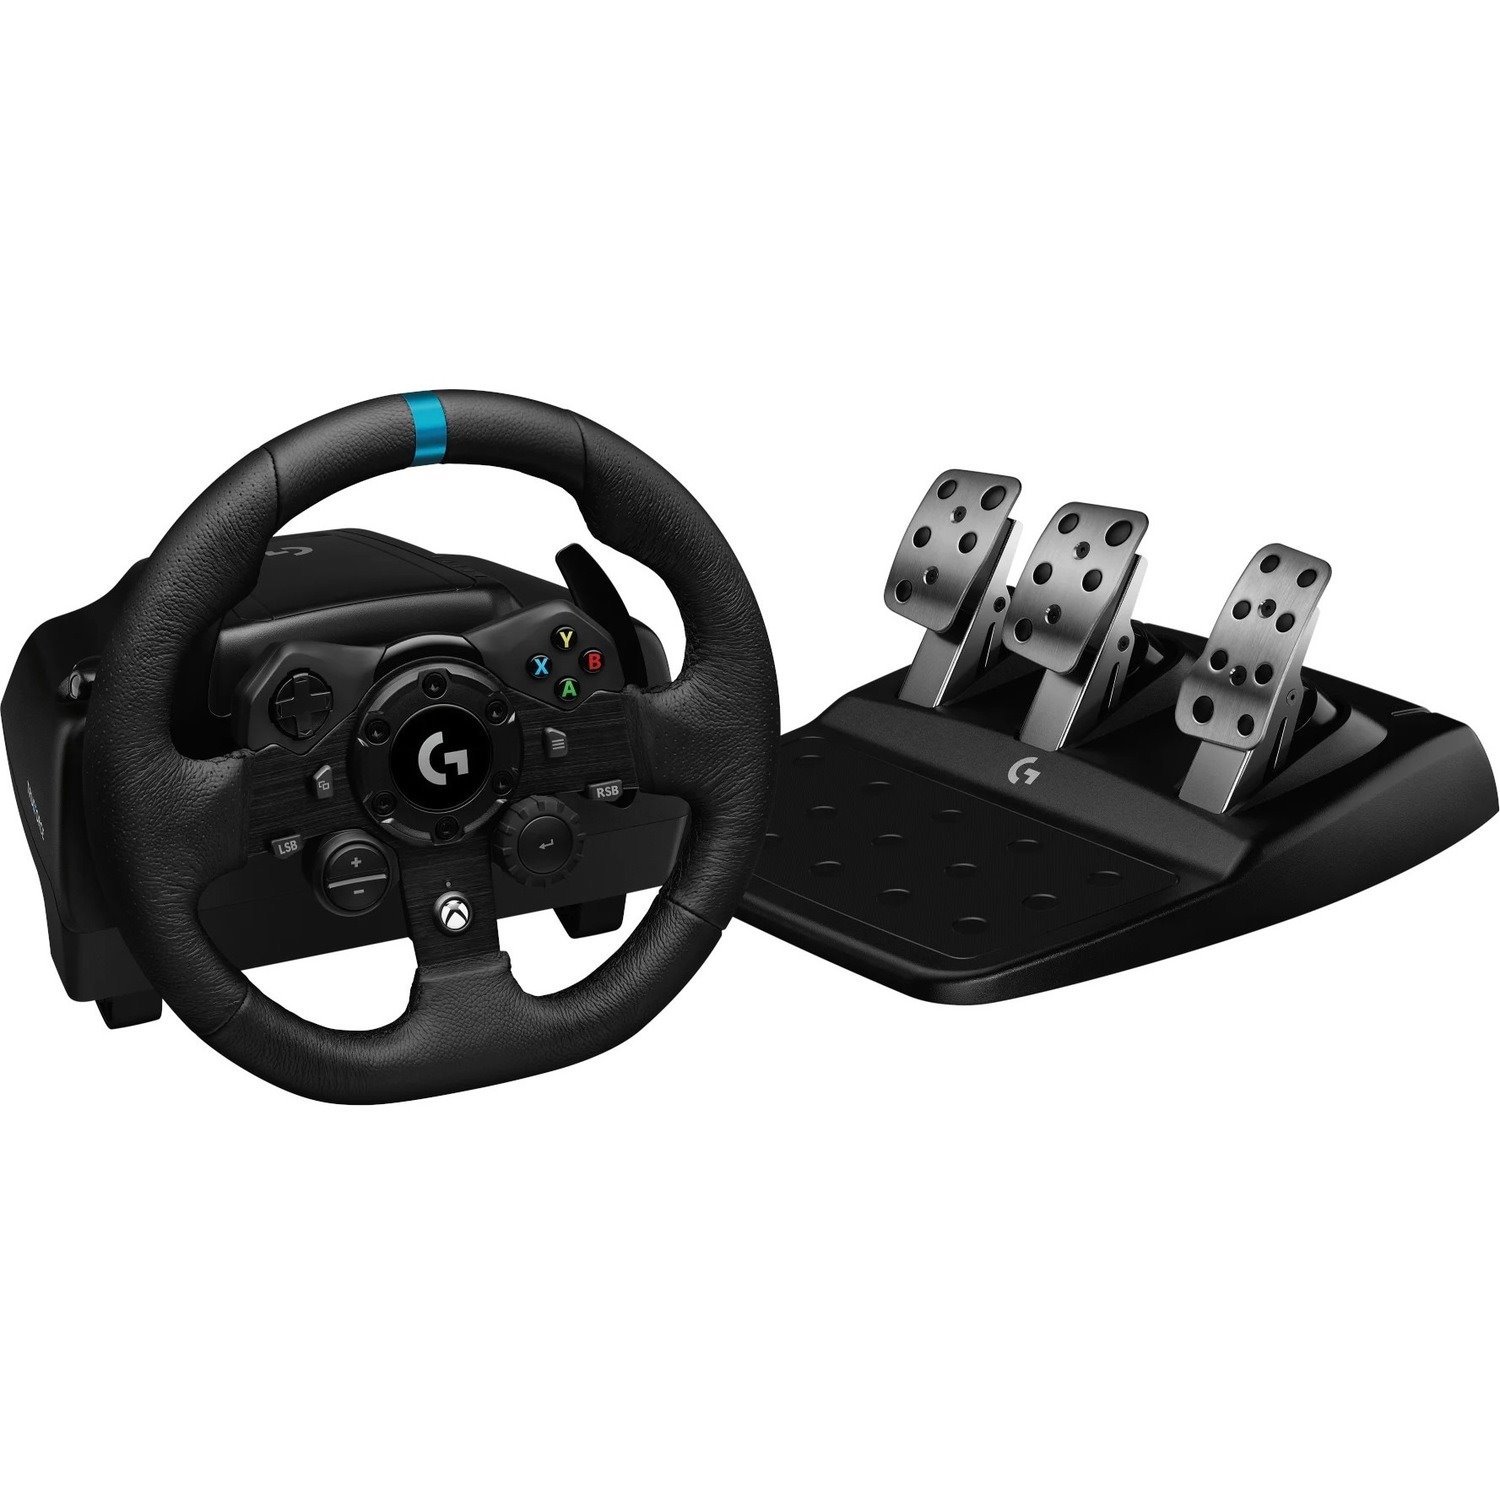 Logitech Trueforce Racing Wheel For Xbox, Playstation And PC